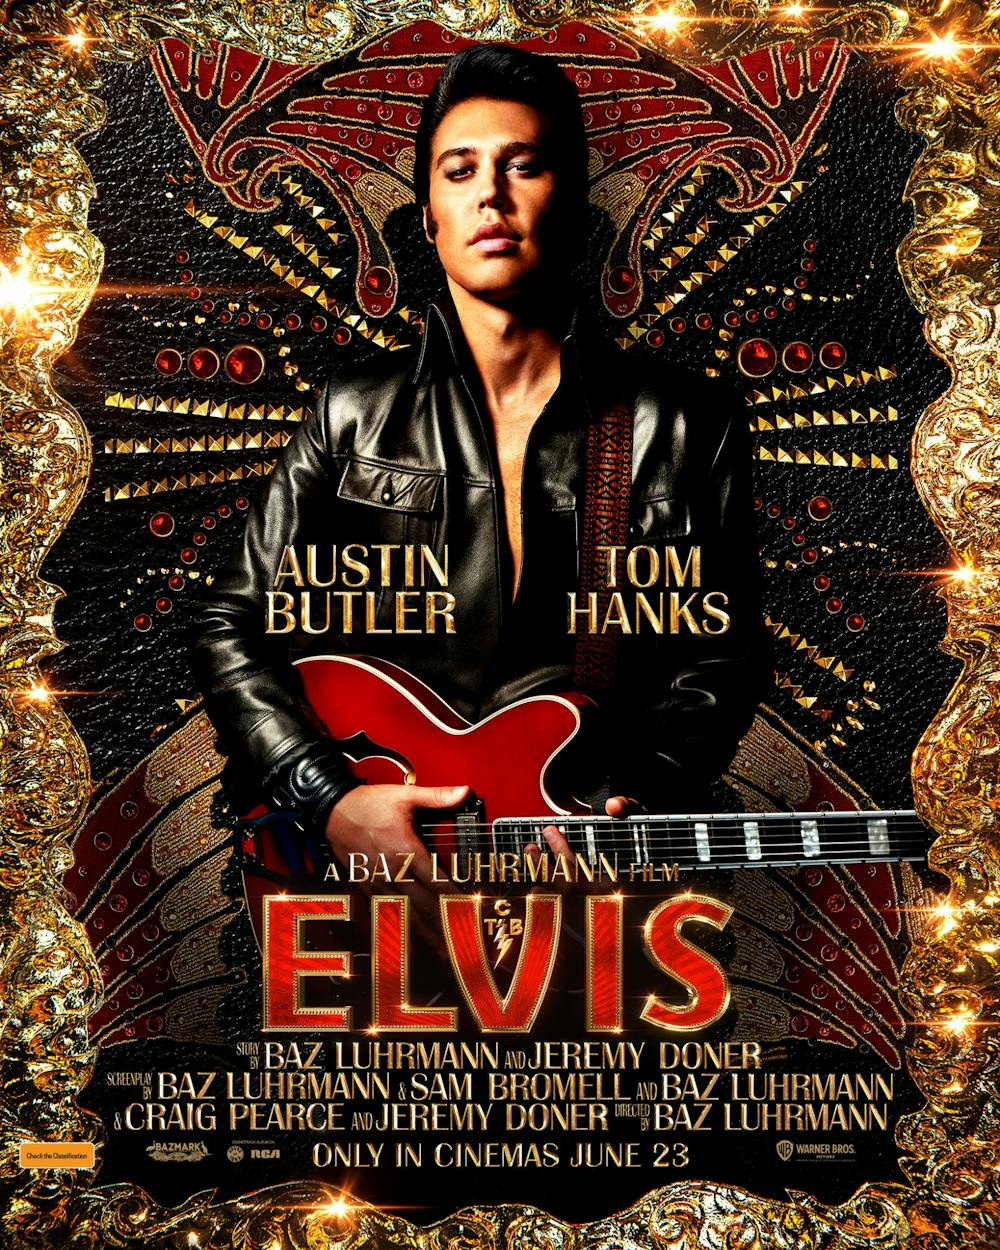 Review: ‘Elvis’ is an interesting take on a biopic